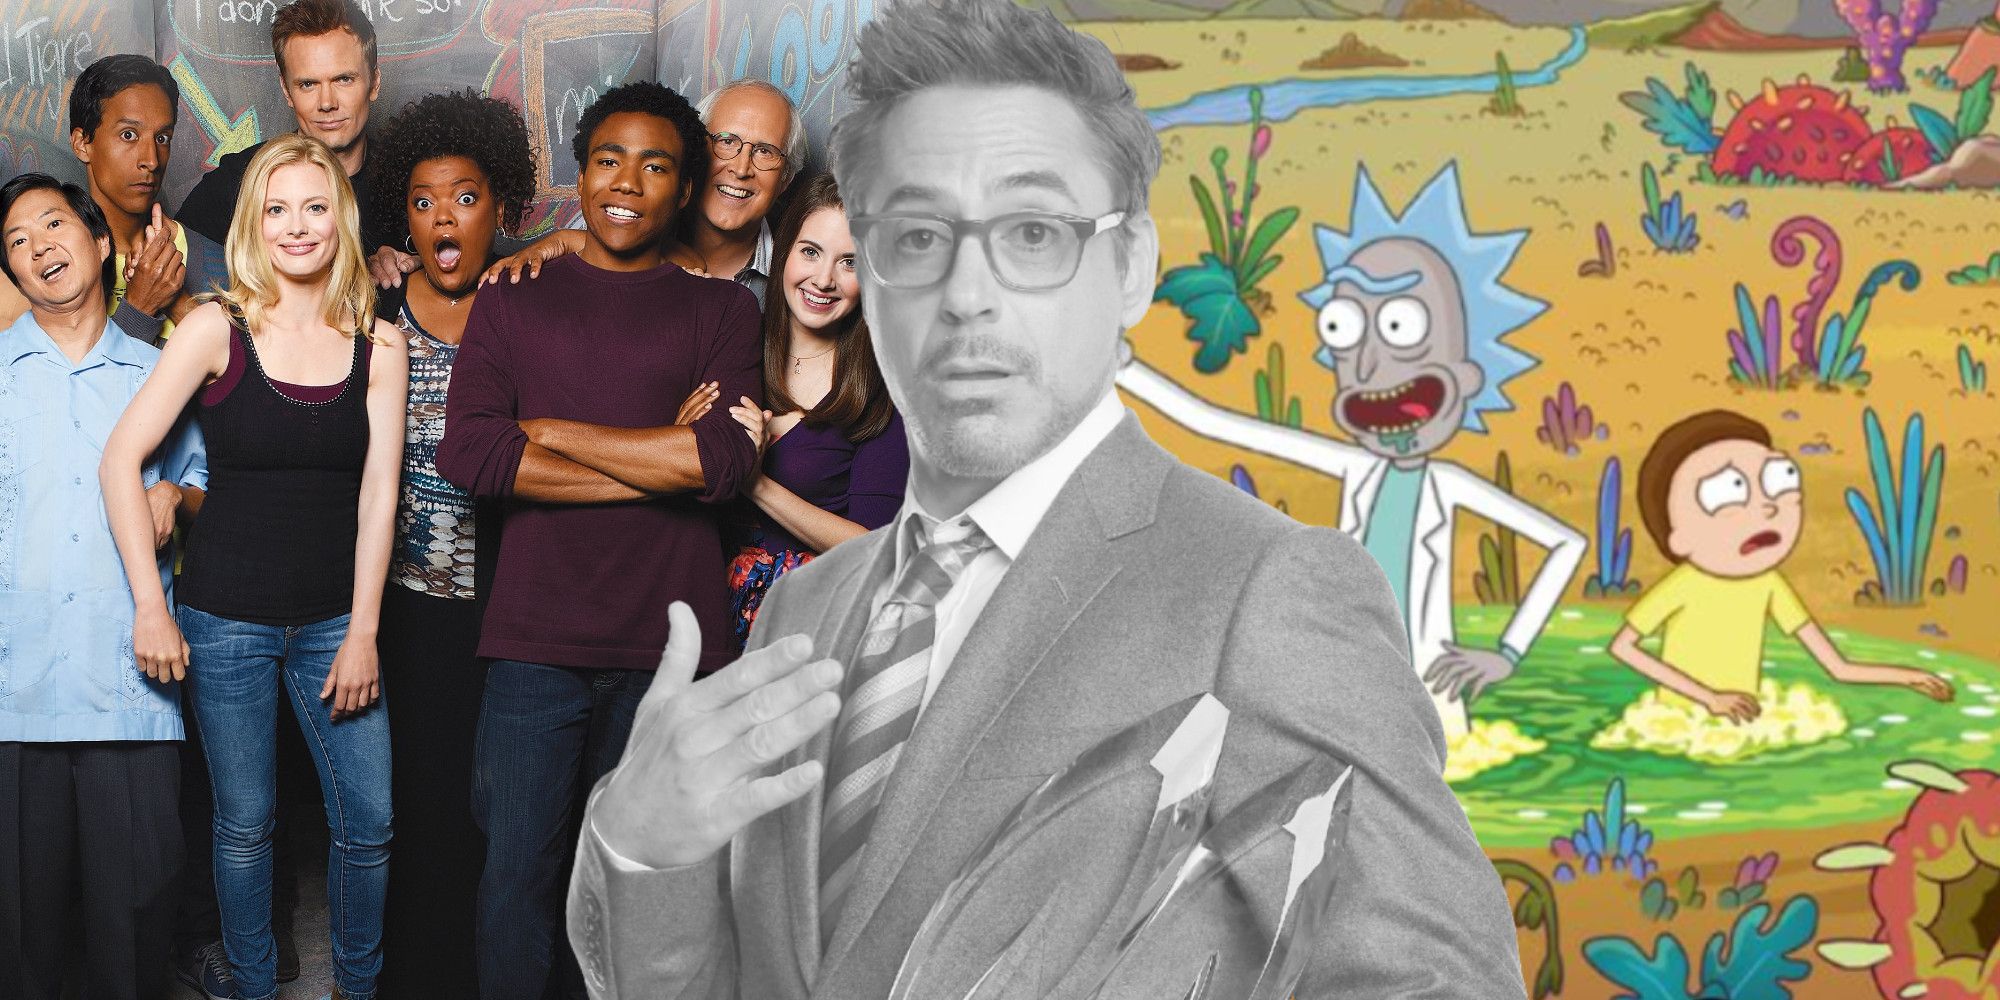 The Cast of Community, Rick and Morty, and Robert Downey Jr